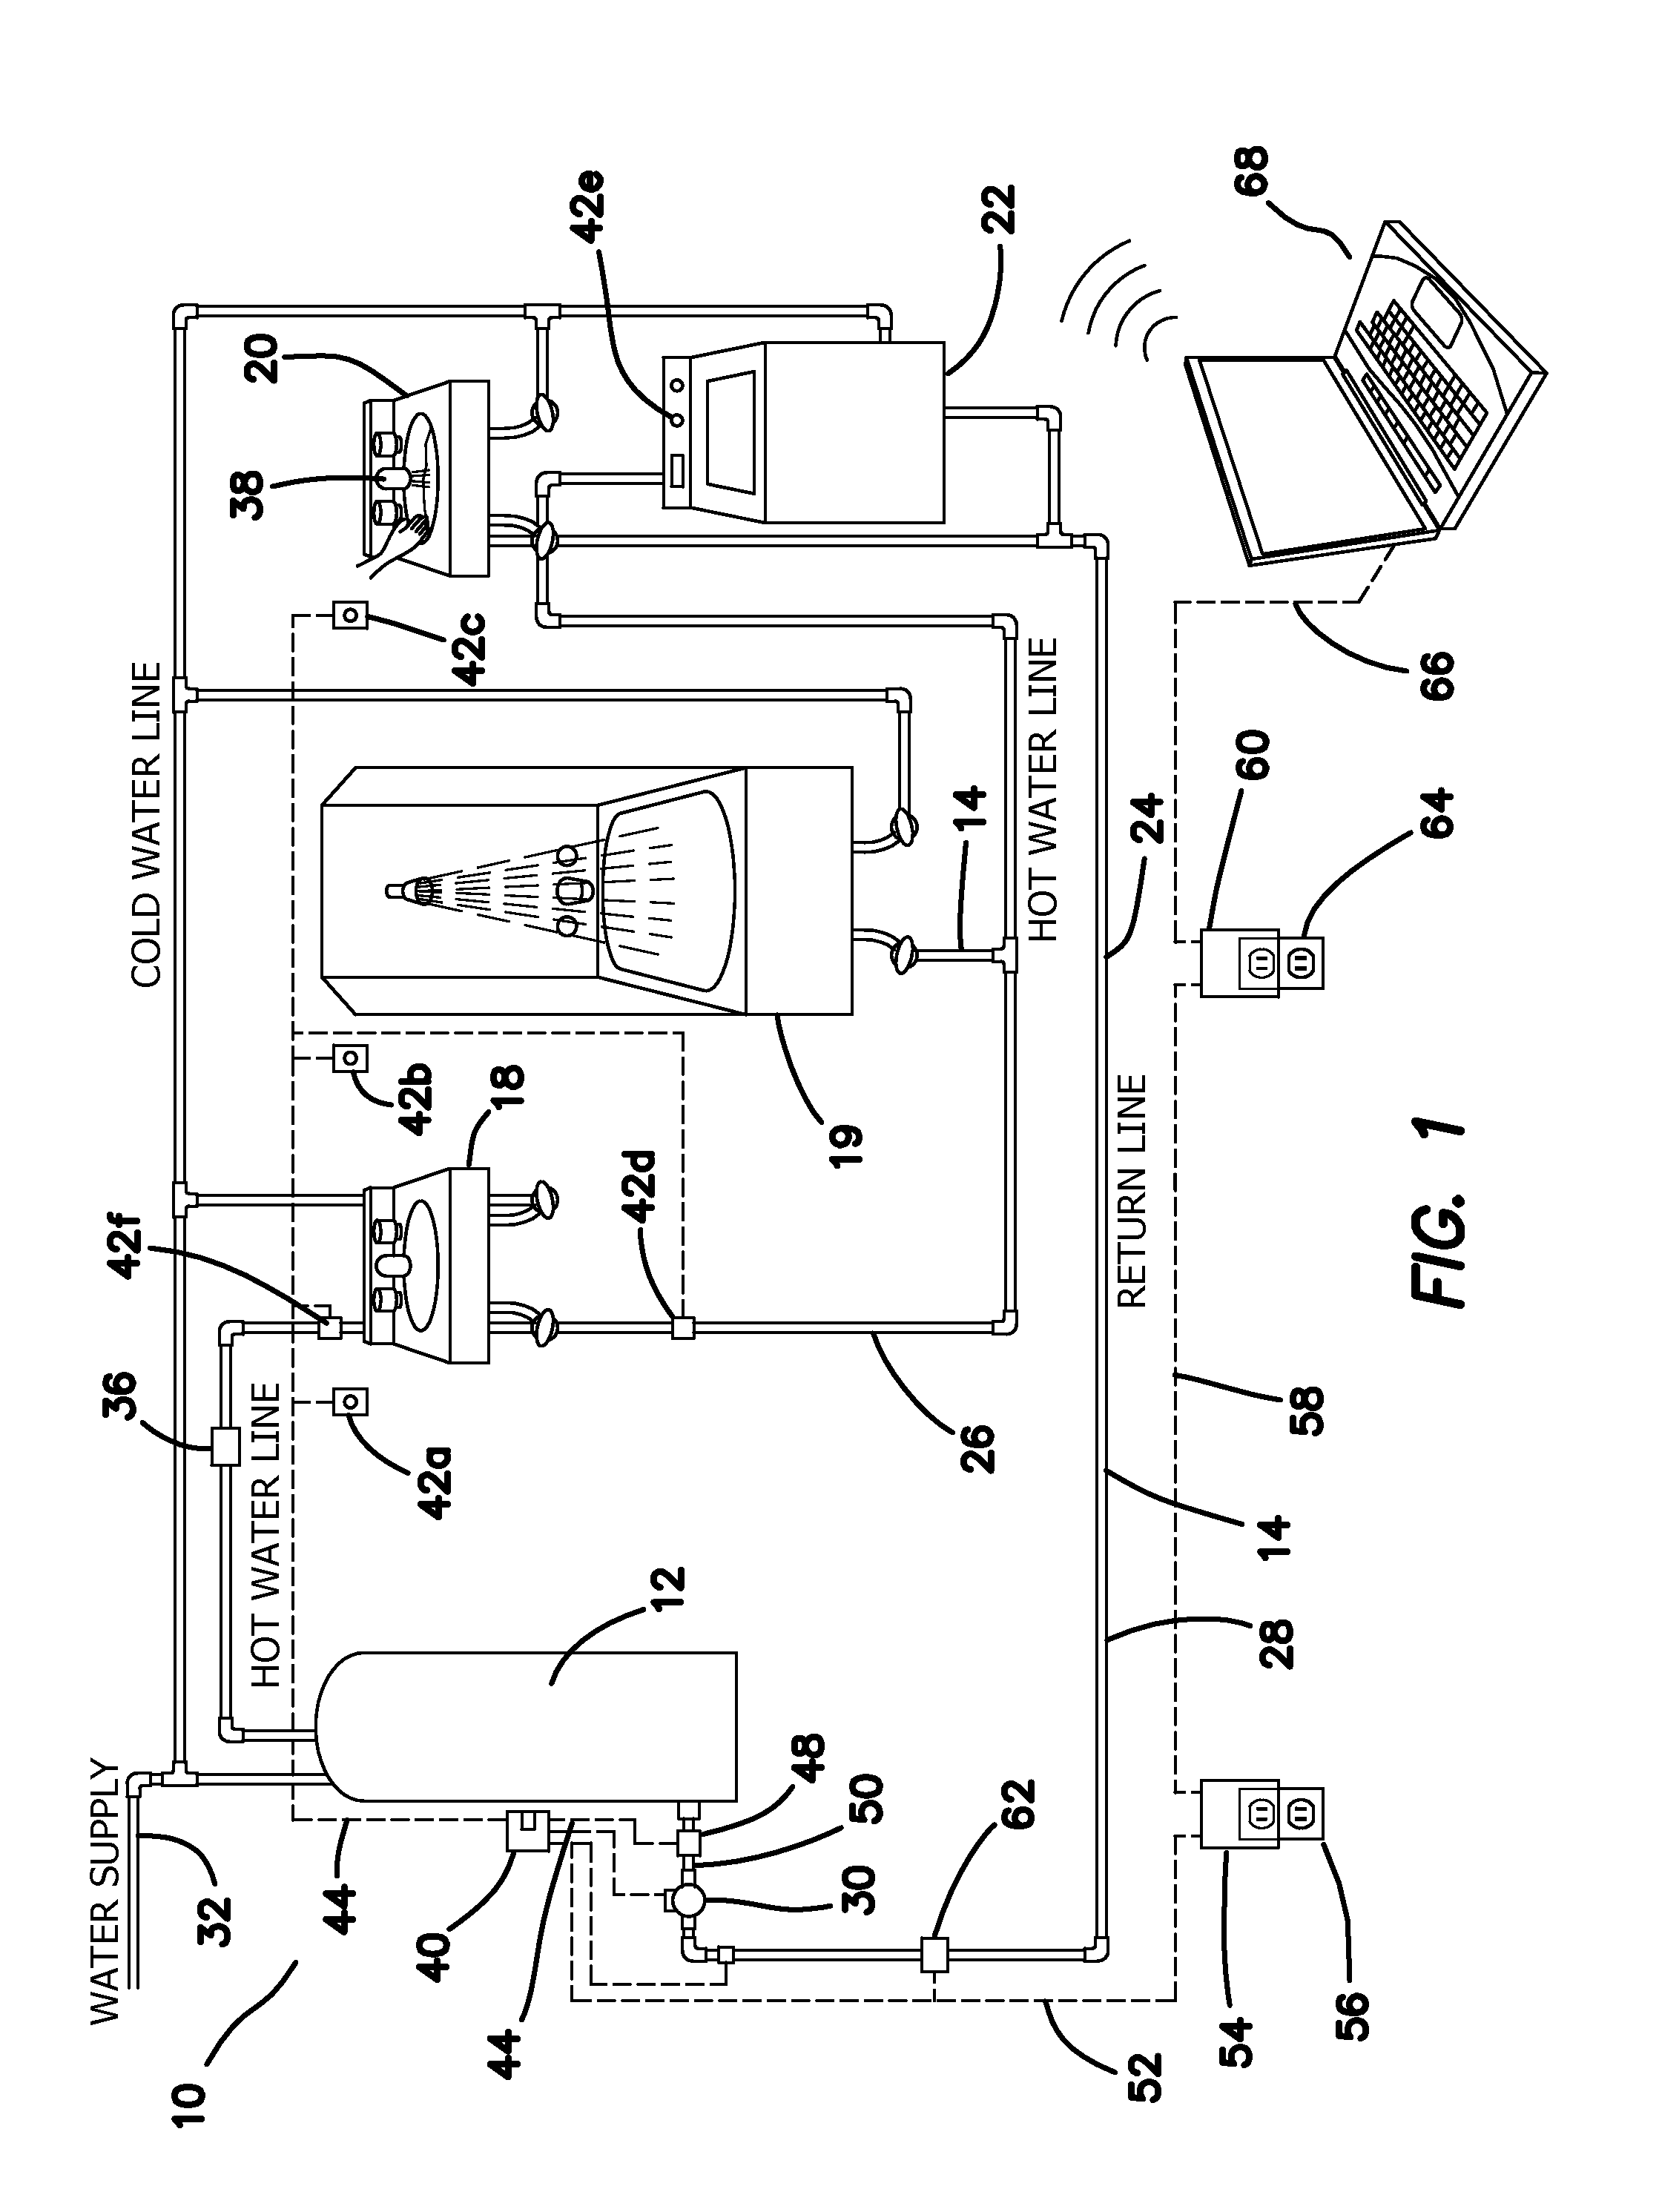 Methods and Apparatus for Remotely Monitoring and/or Controlling a Plumbing System